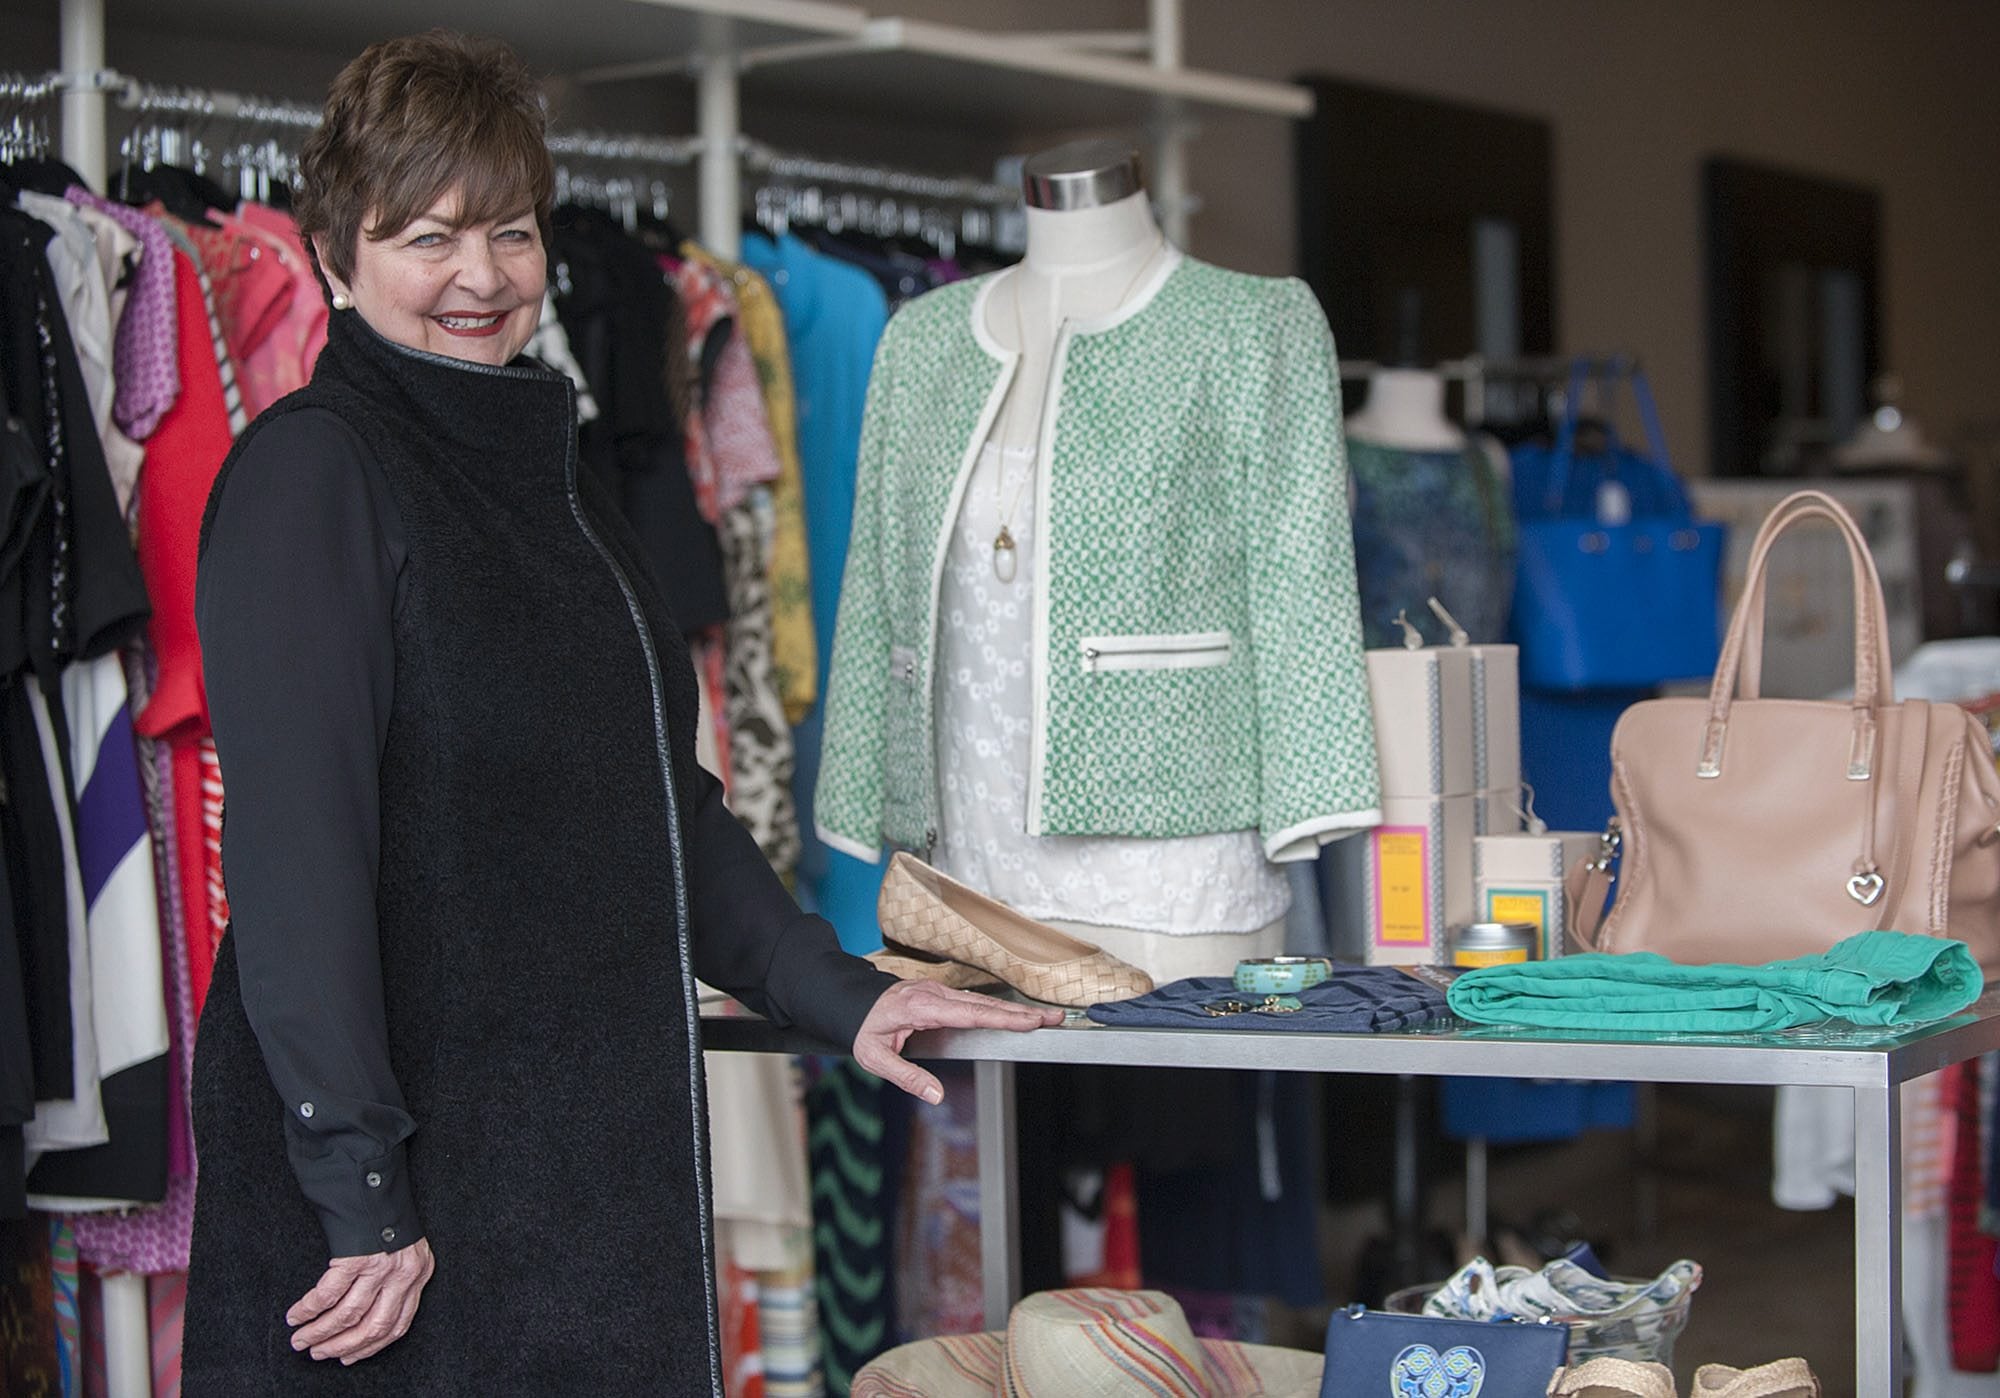 Joni Vilhauer opened Modao Resale in 2012 after a career in fashion and interior design.